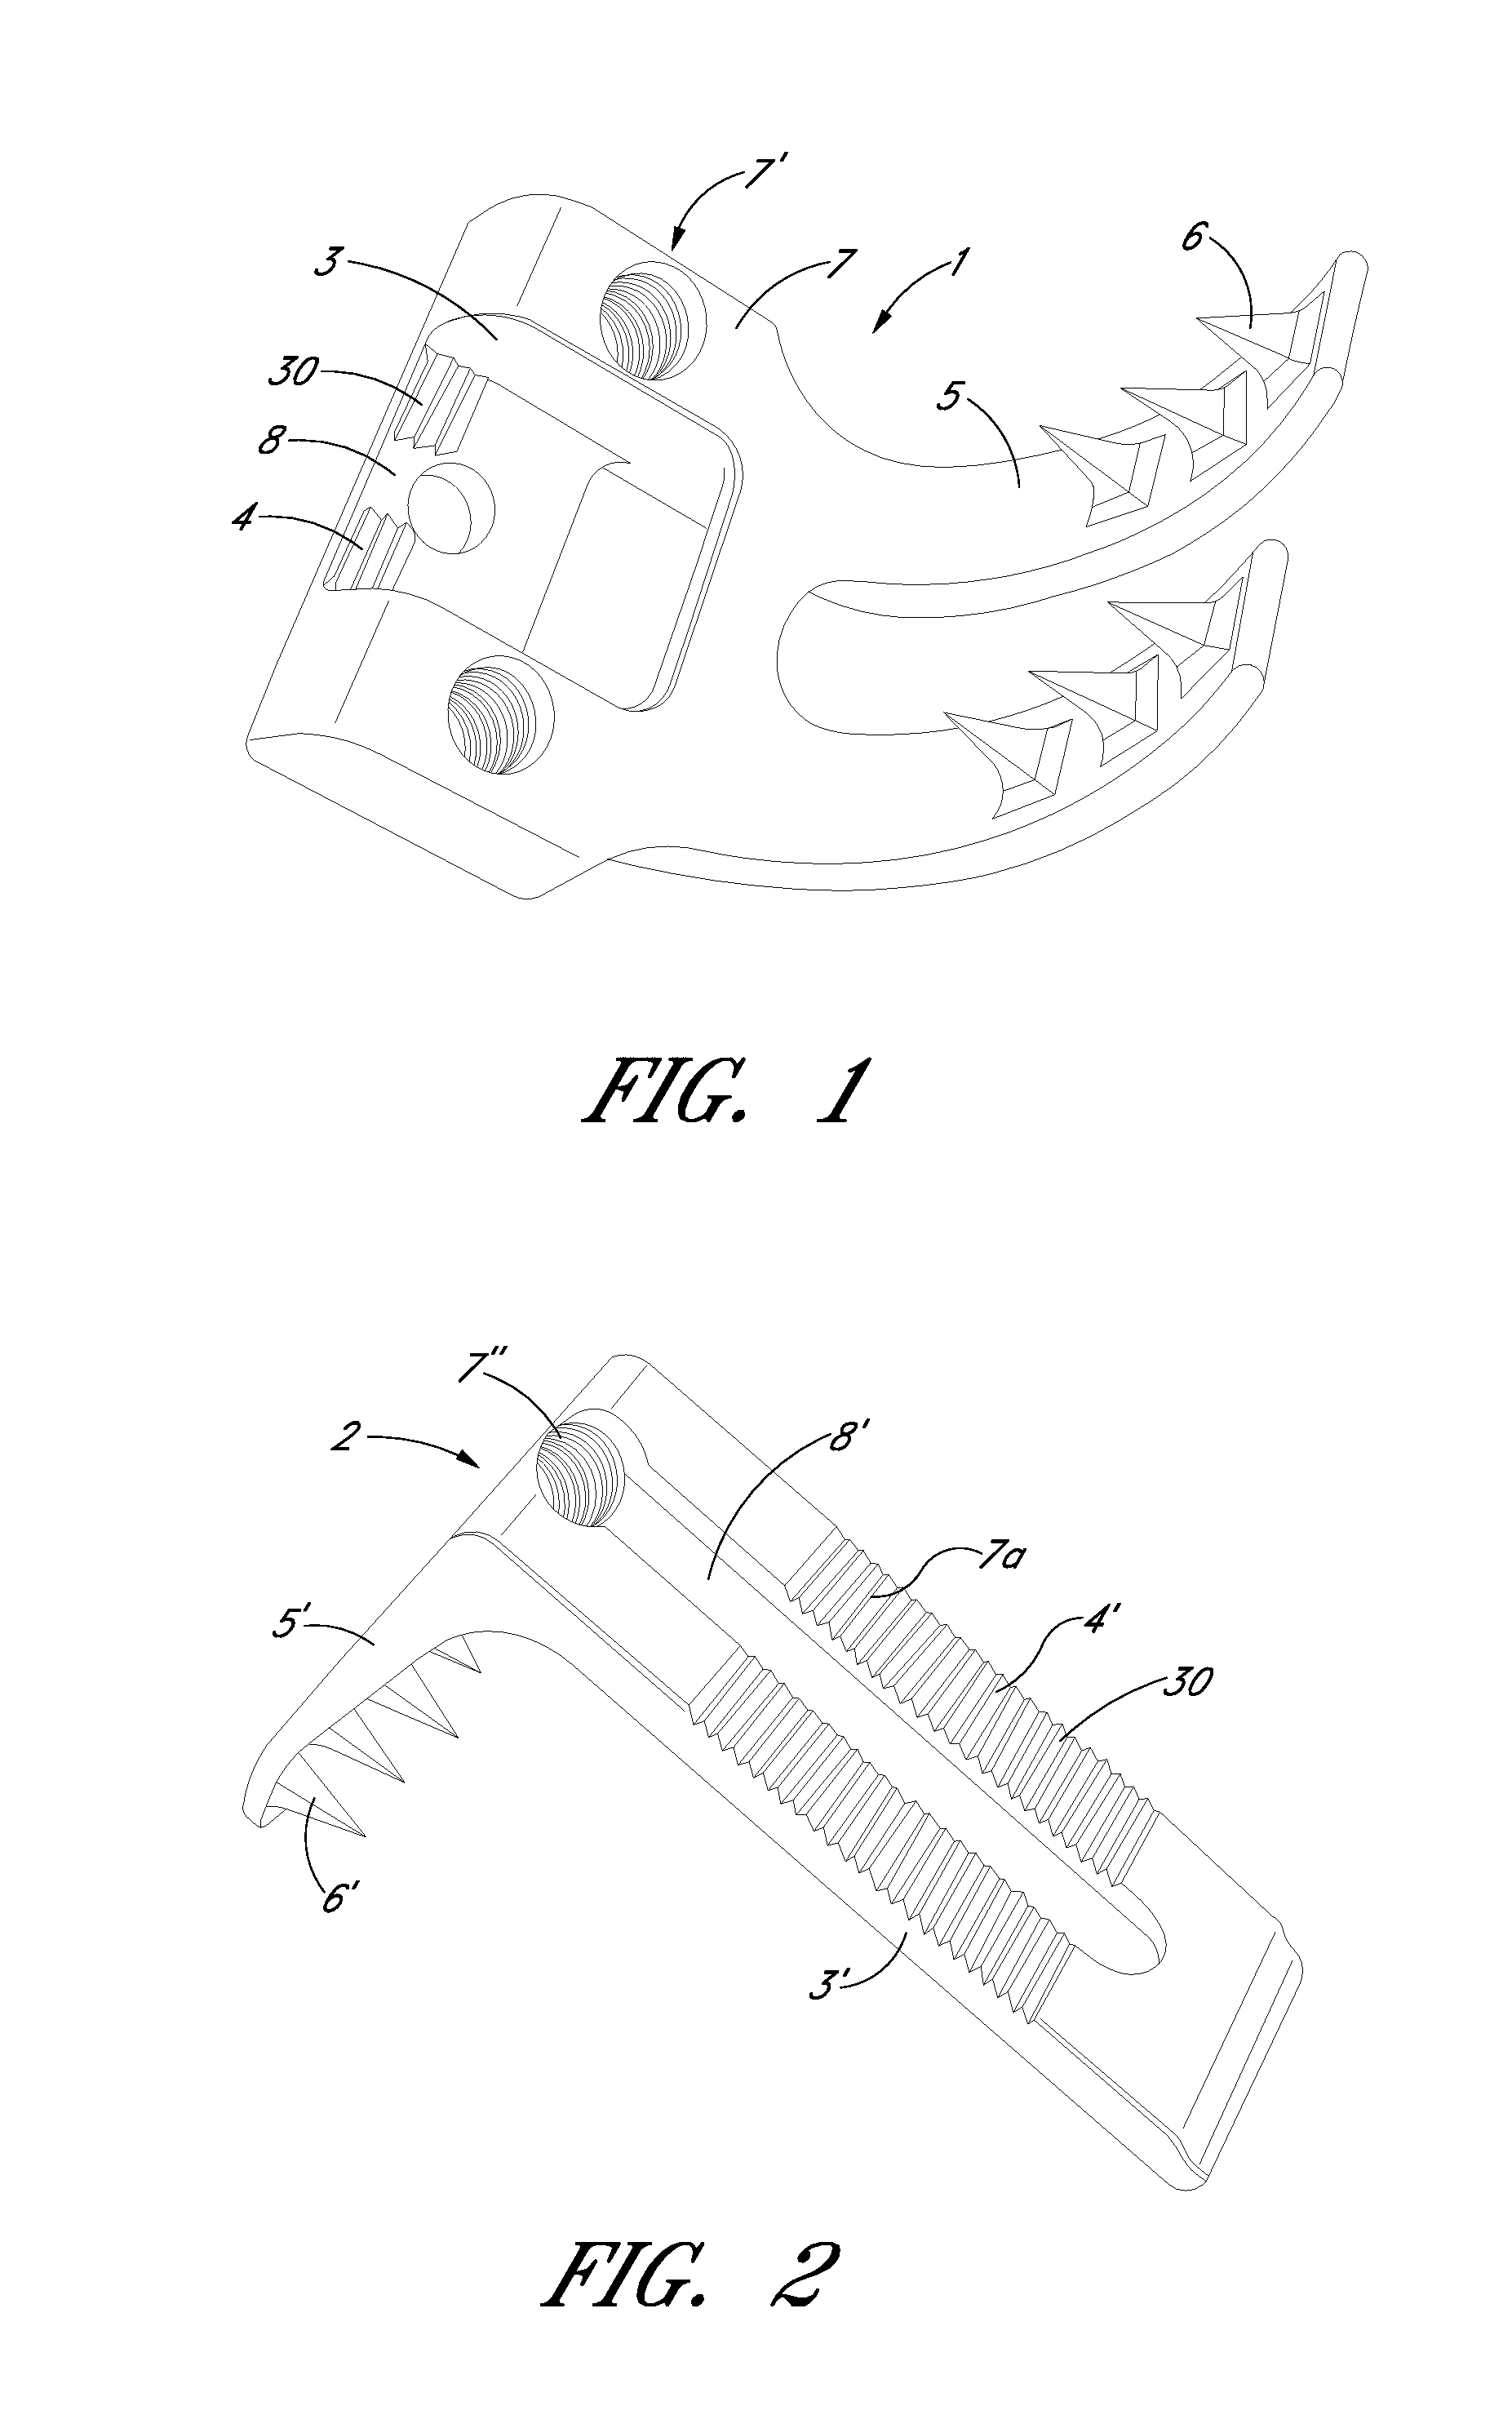 Clamp for attaching surgical aids to bone during a surgical procedure and system for doing the same